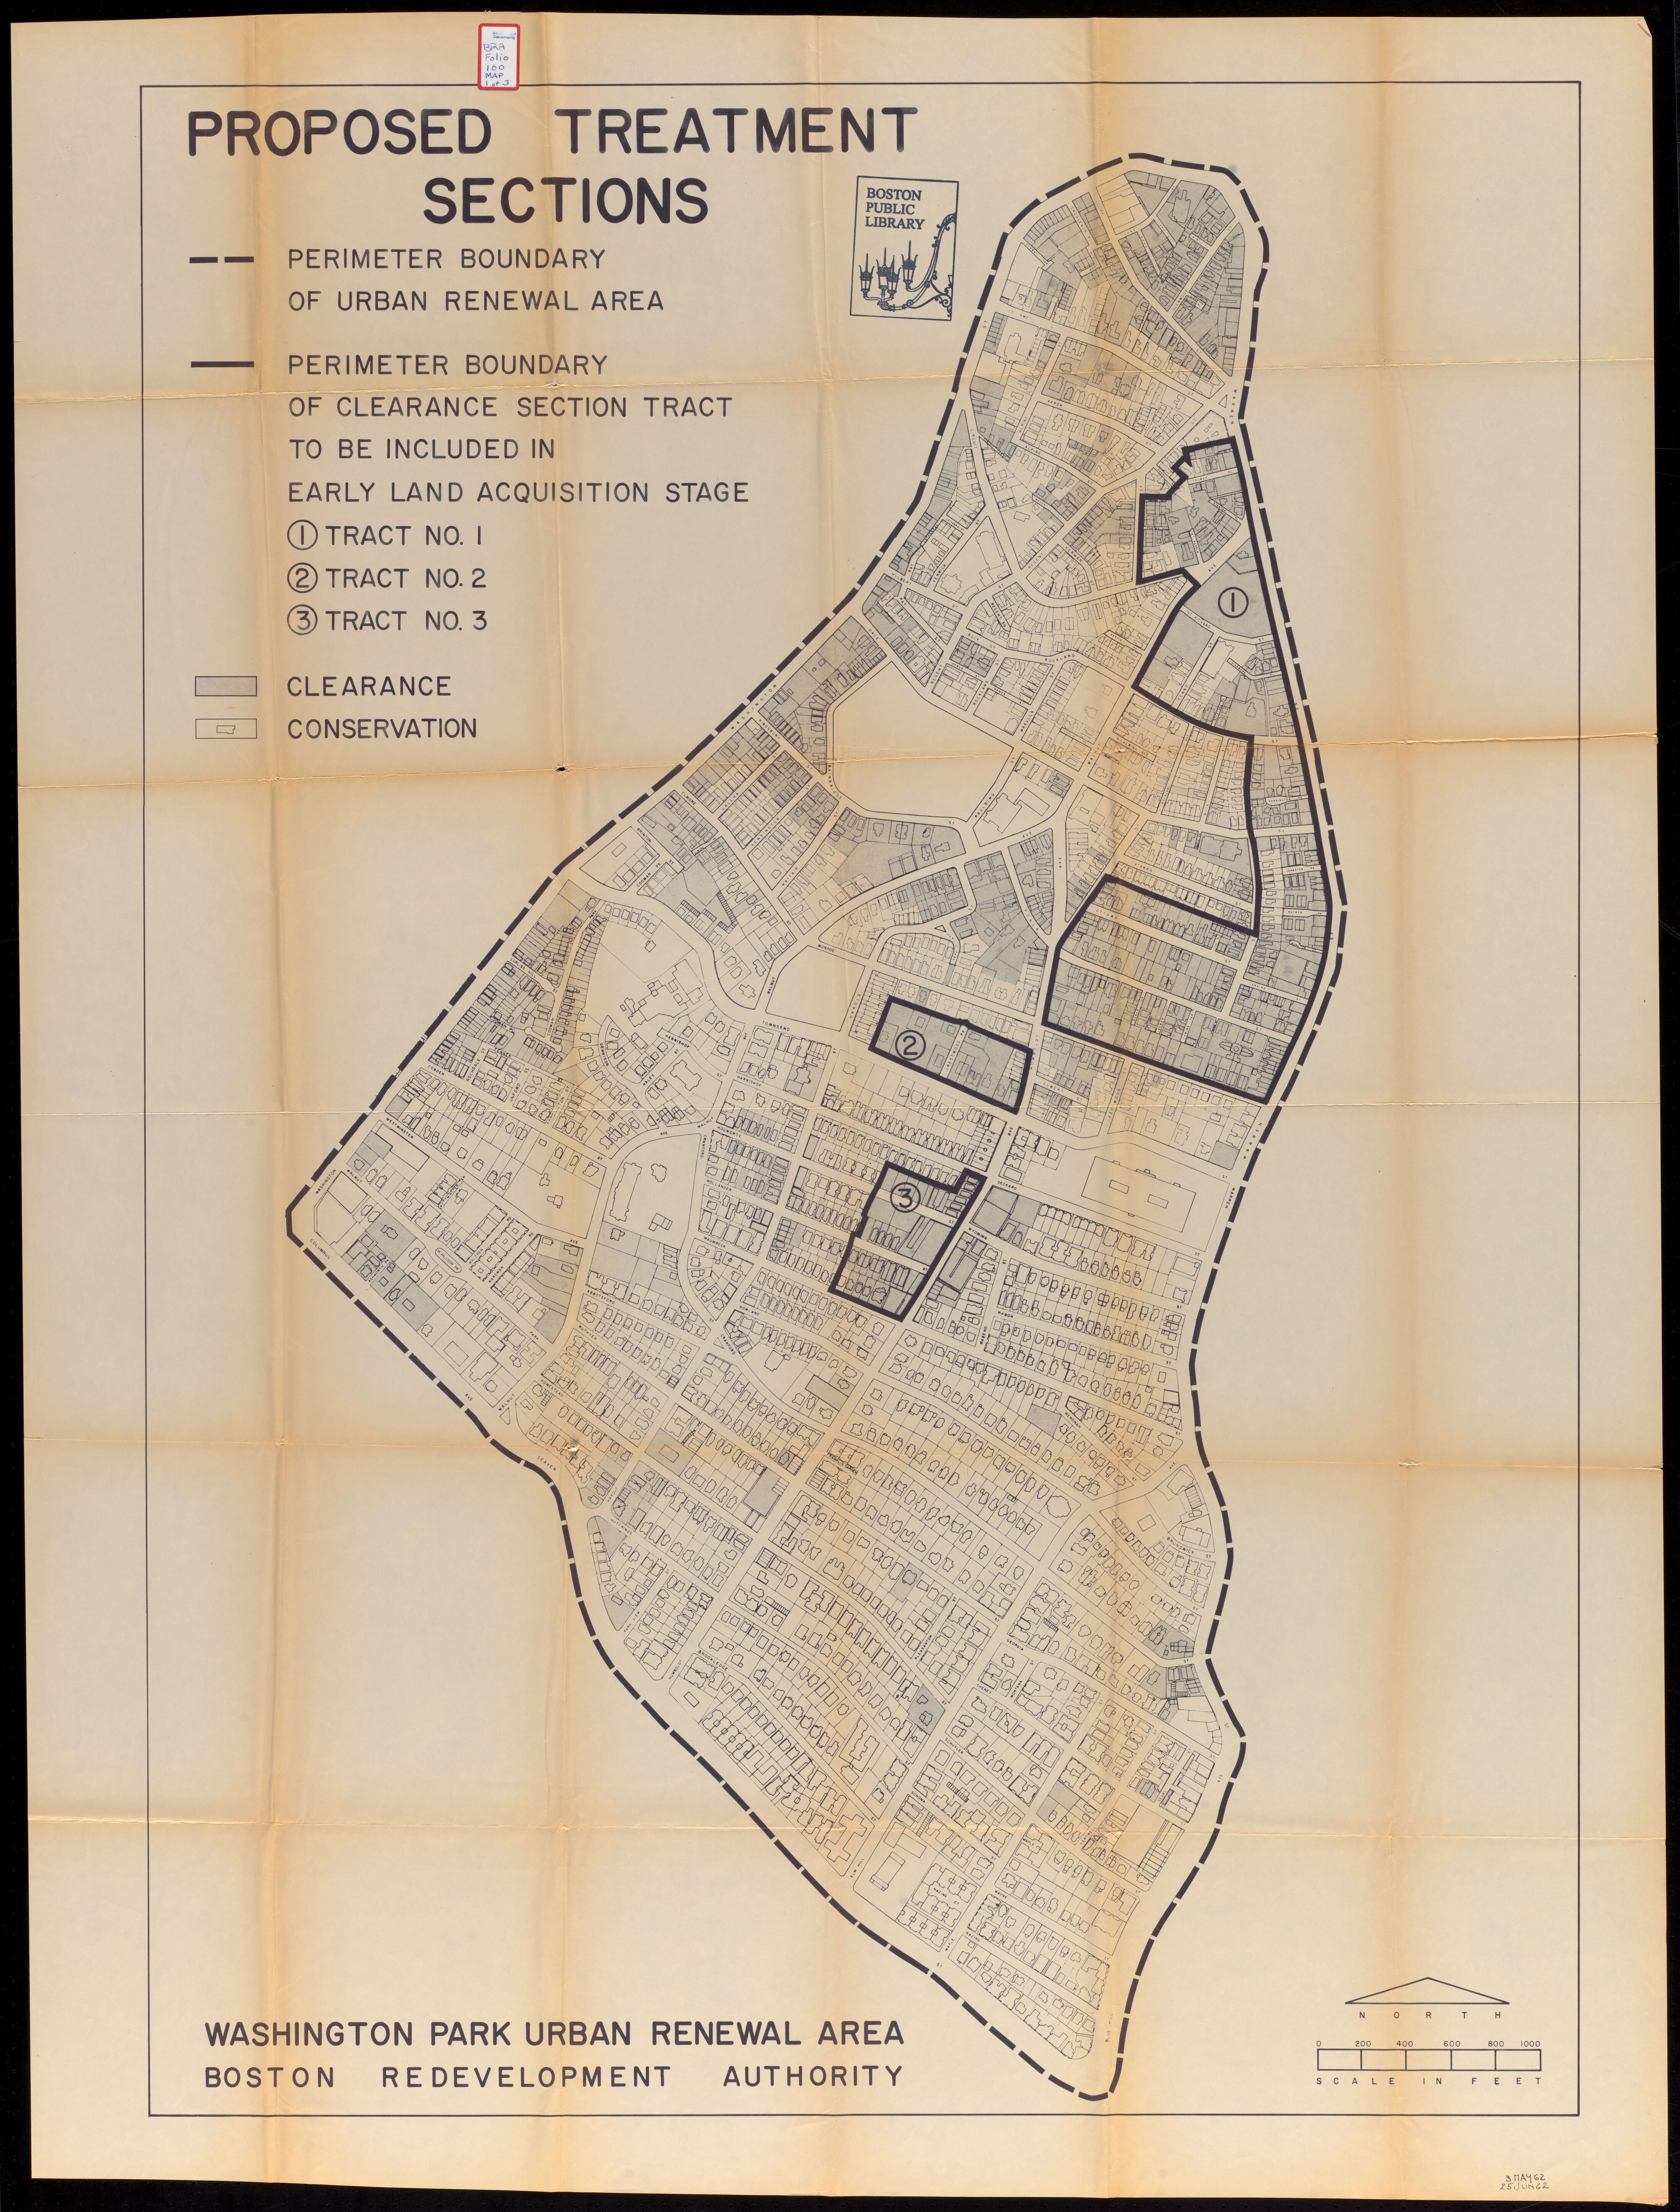 This map of Washington Park was part of a loan application submitted to the US Urban Renewal Administration in the 1960s.